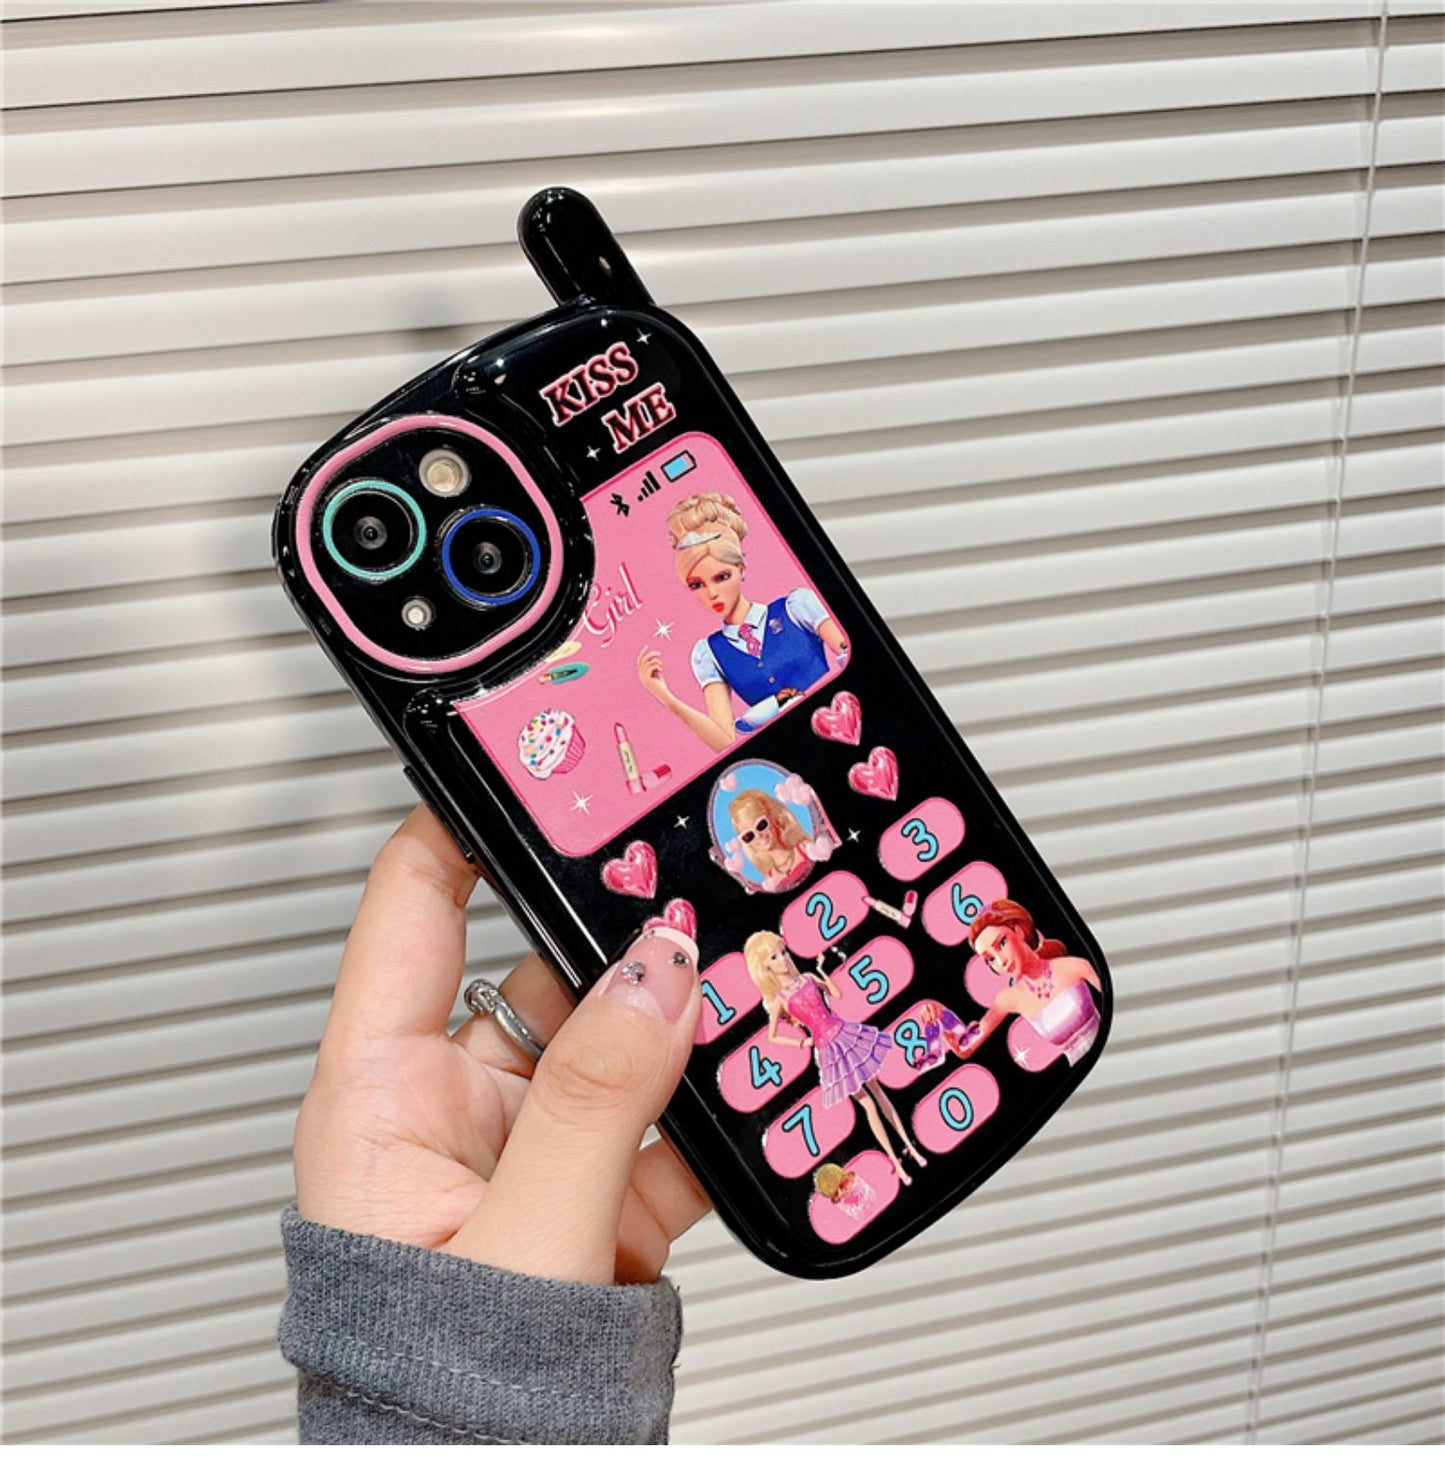 Barbie Cellphone Cover,Barbie Cellular Cover,Apple Iphone Barbie Cover